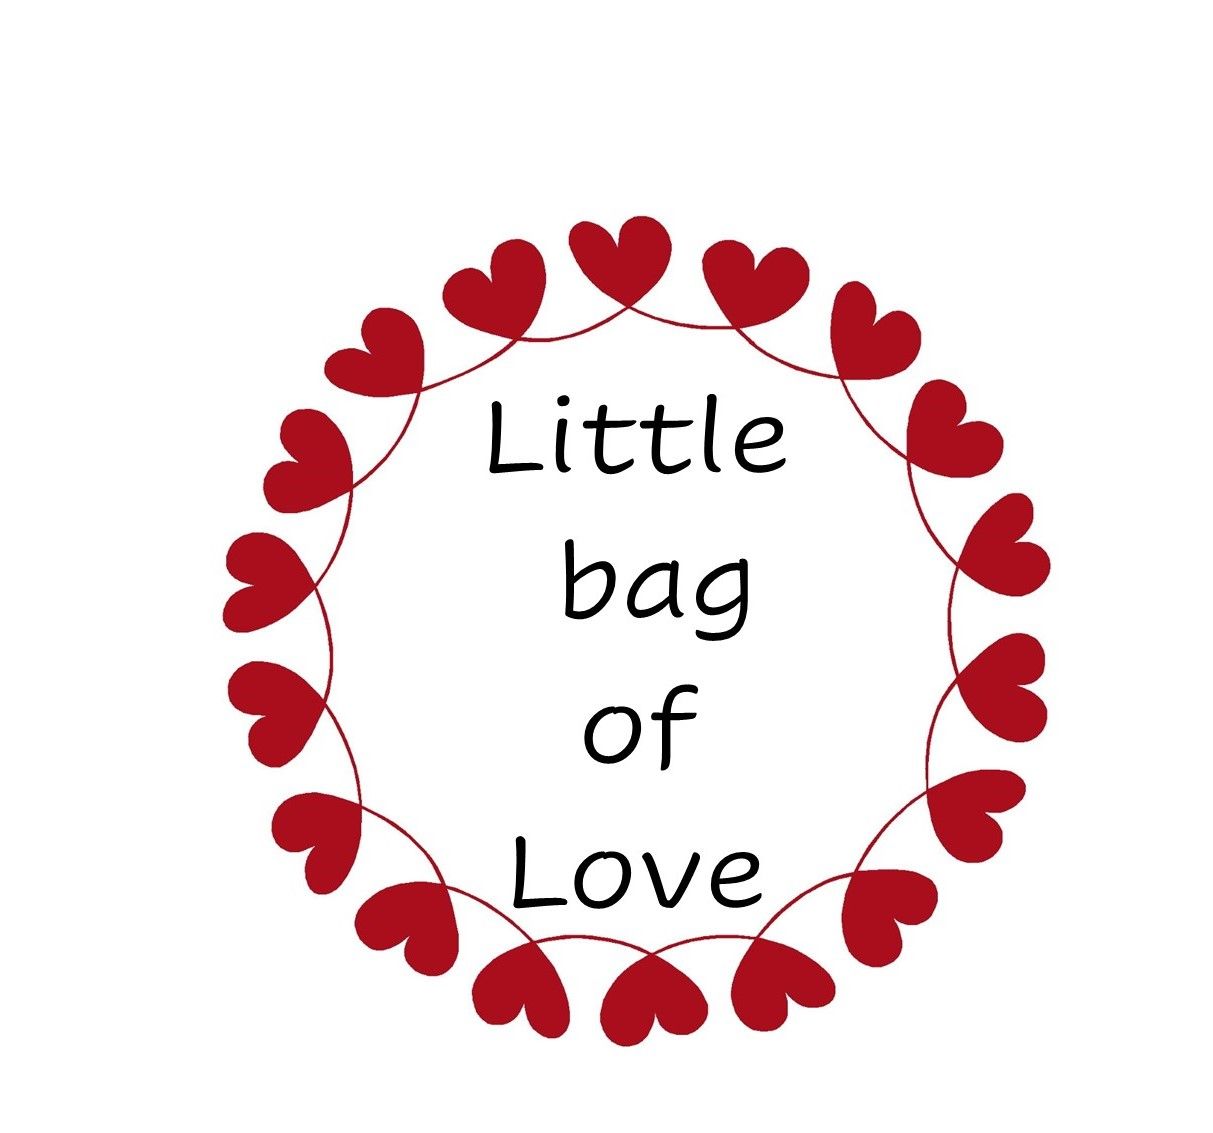 This shop is called LittleBagOfLove 